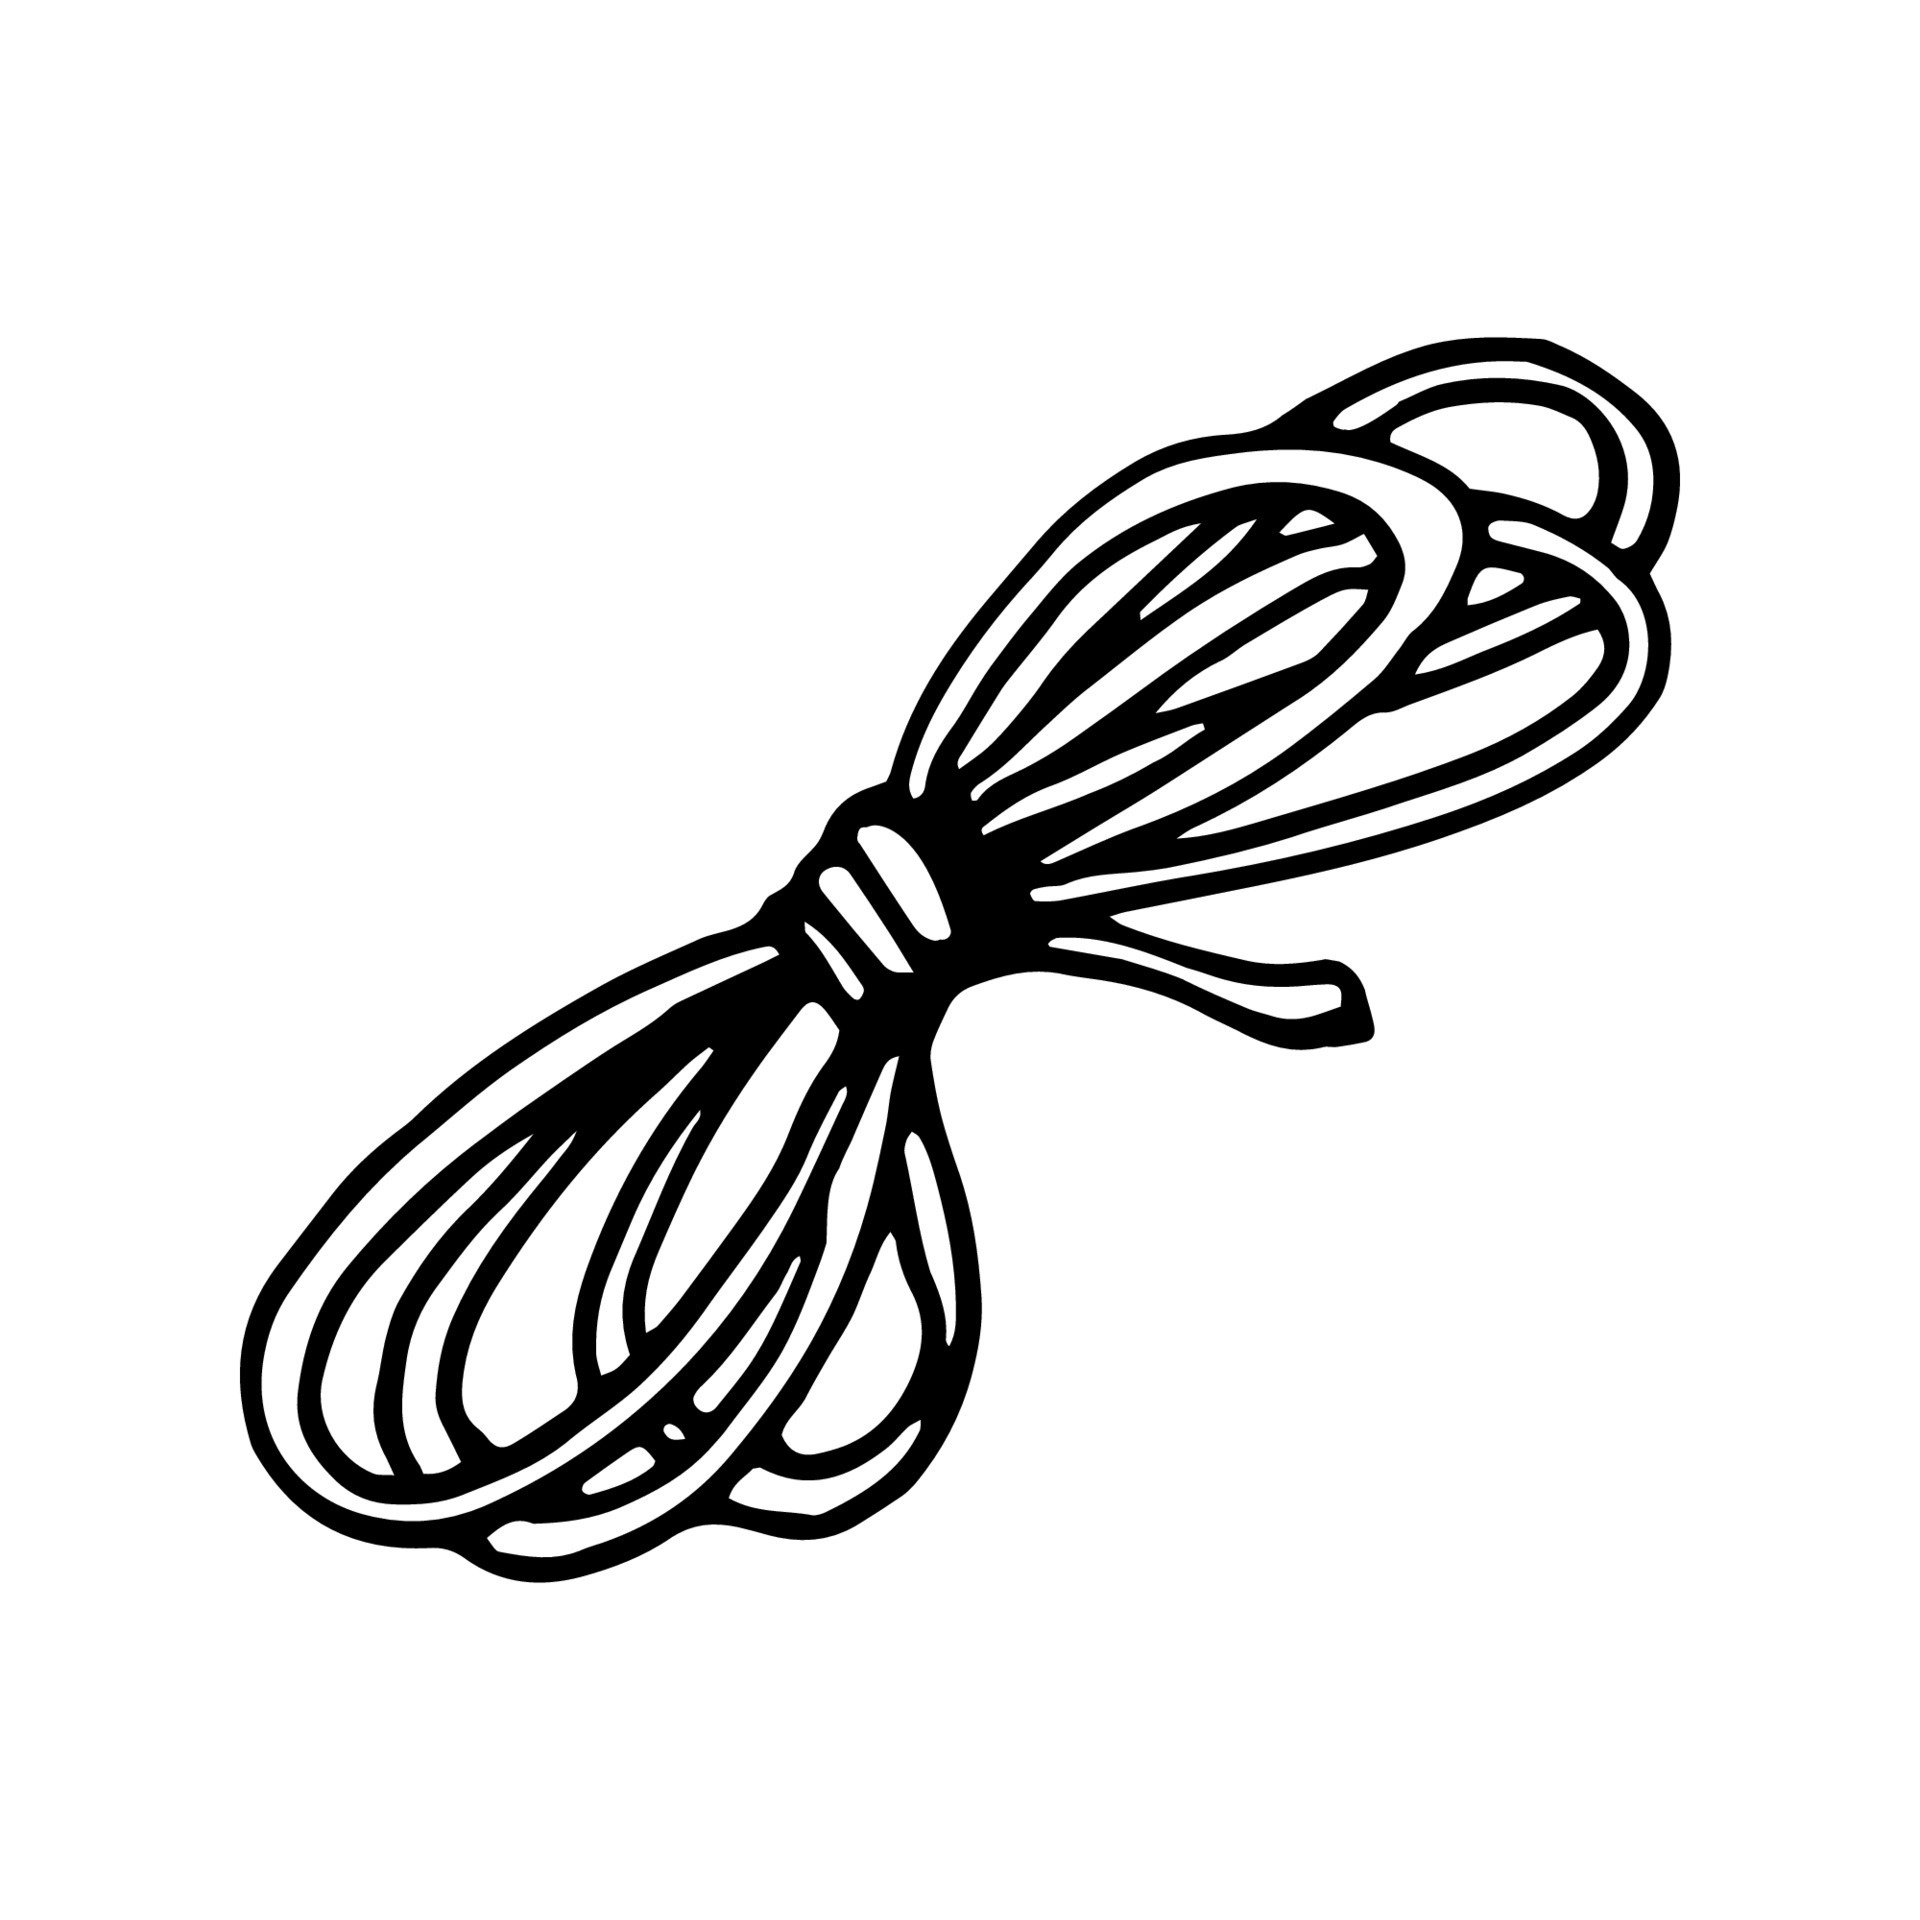 https://static.vecteezy.com/system/resources/previews/023/624/175/original/hand-drawn-camping-climbing-rope-clipart-isolated-on-white-background-drawing-for-prints-poster-cute-stationery-travel-design-high-quality-illustration-vector.jpg